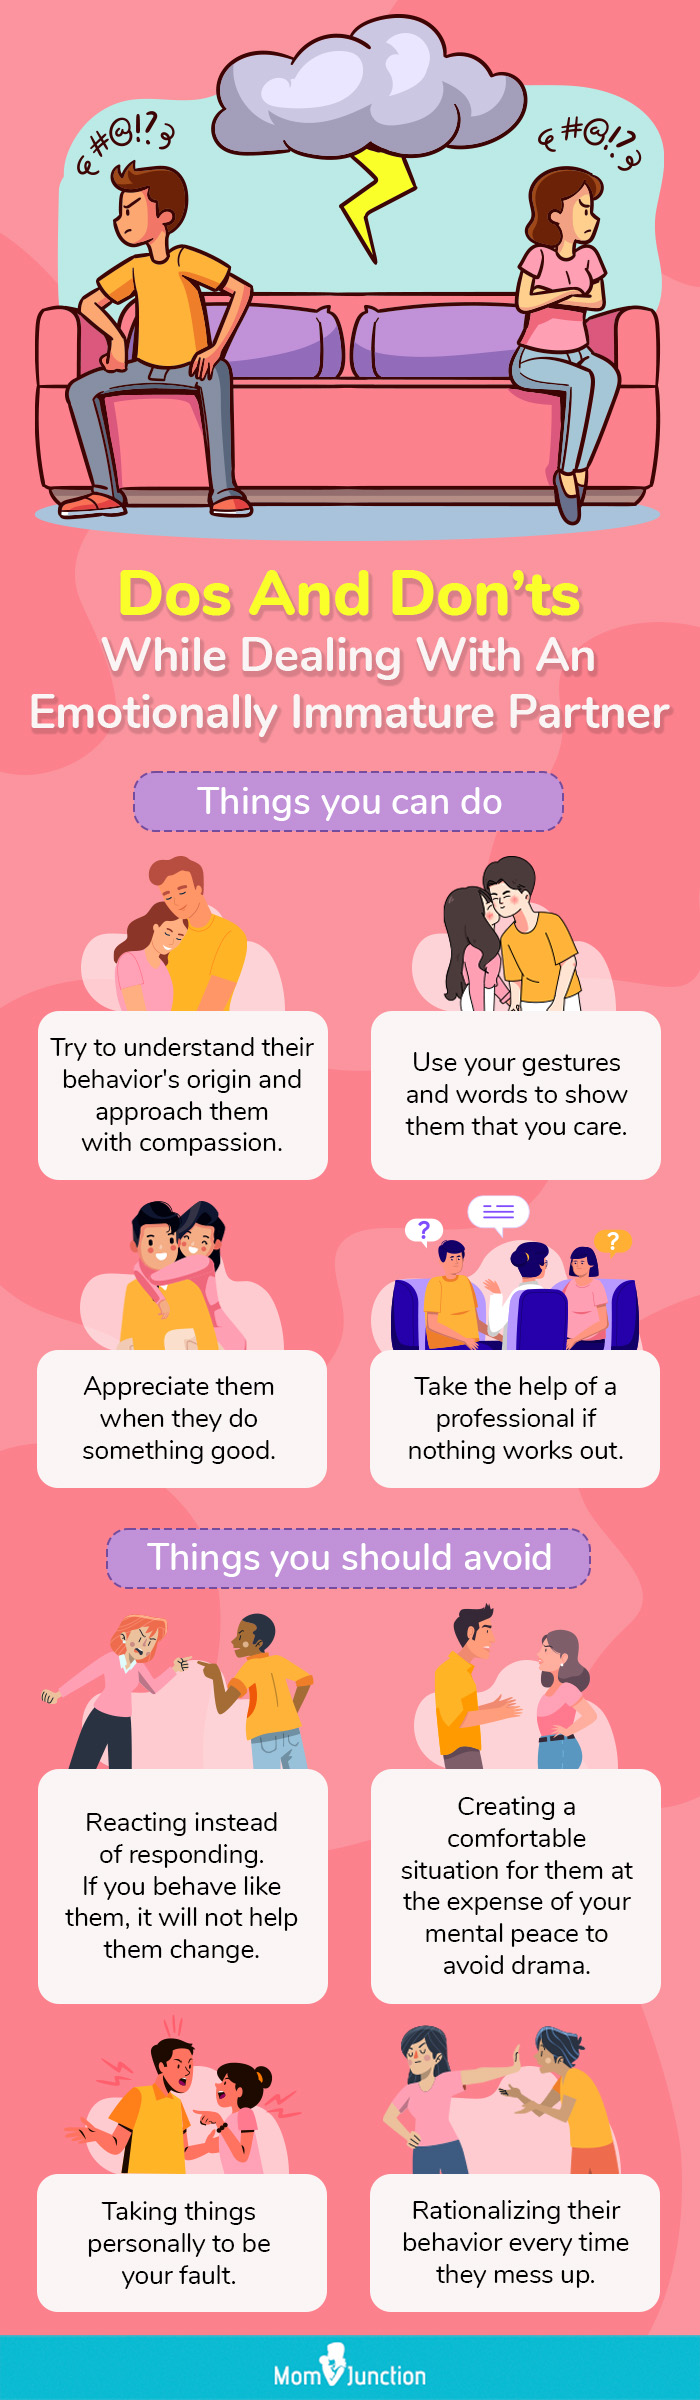 dos and don’ts while dealing with an emotionally immature partner (infographic)